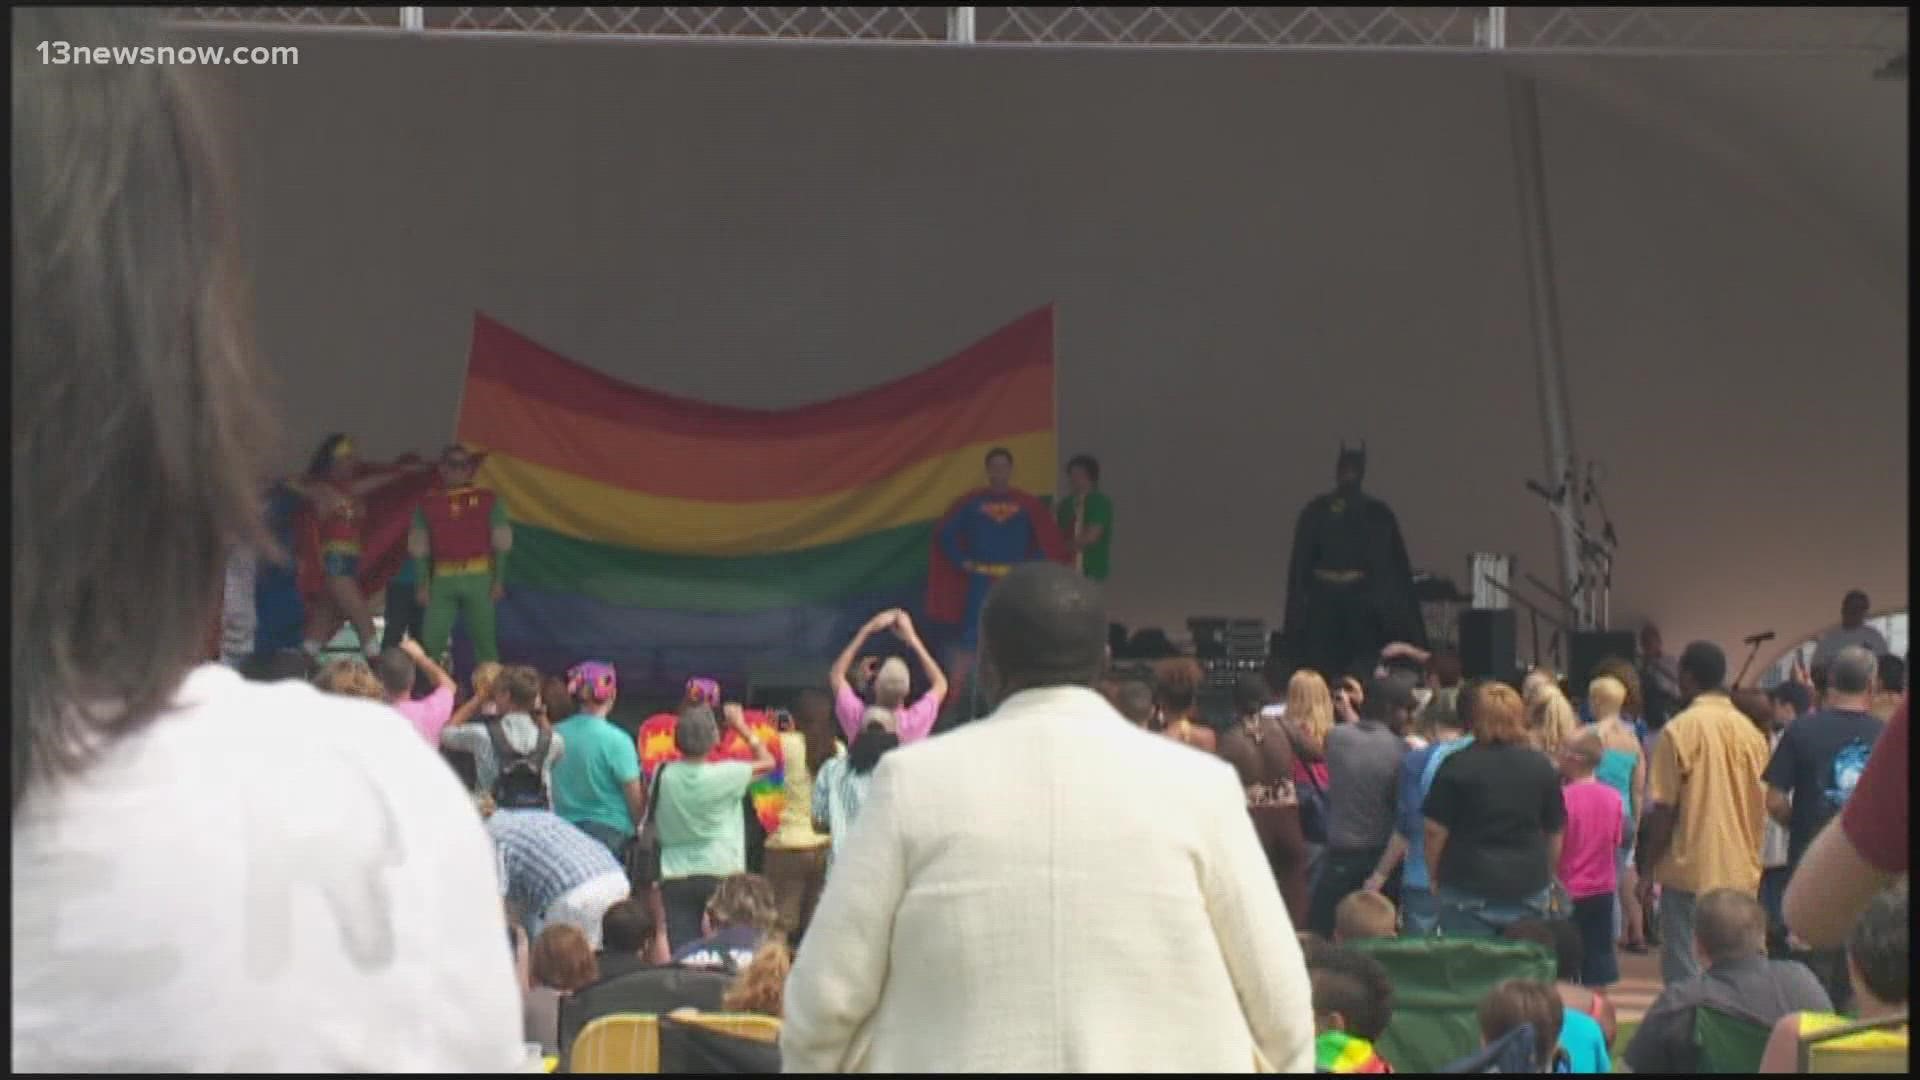 This weekend, Hampton Roads PrideFest returns to Town Point Park in Norfolk. It's an effort to celebrate and promote inclusion and equality.